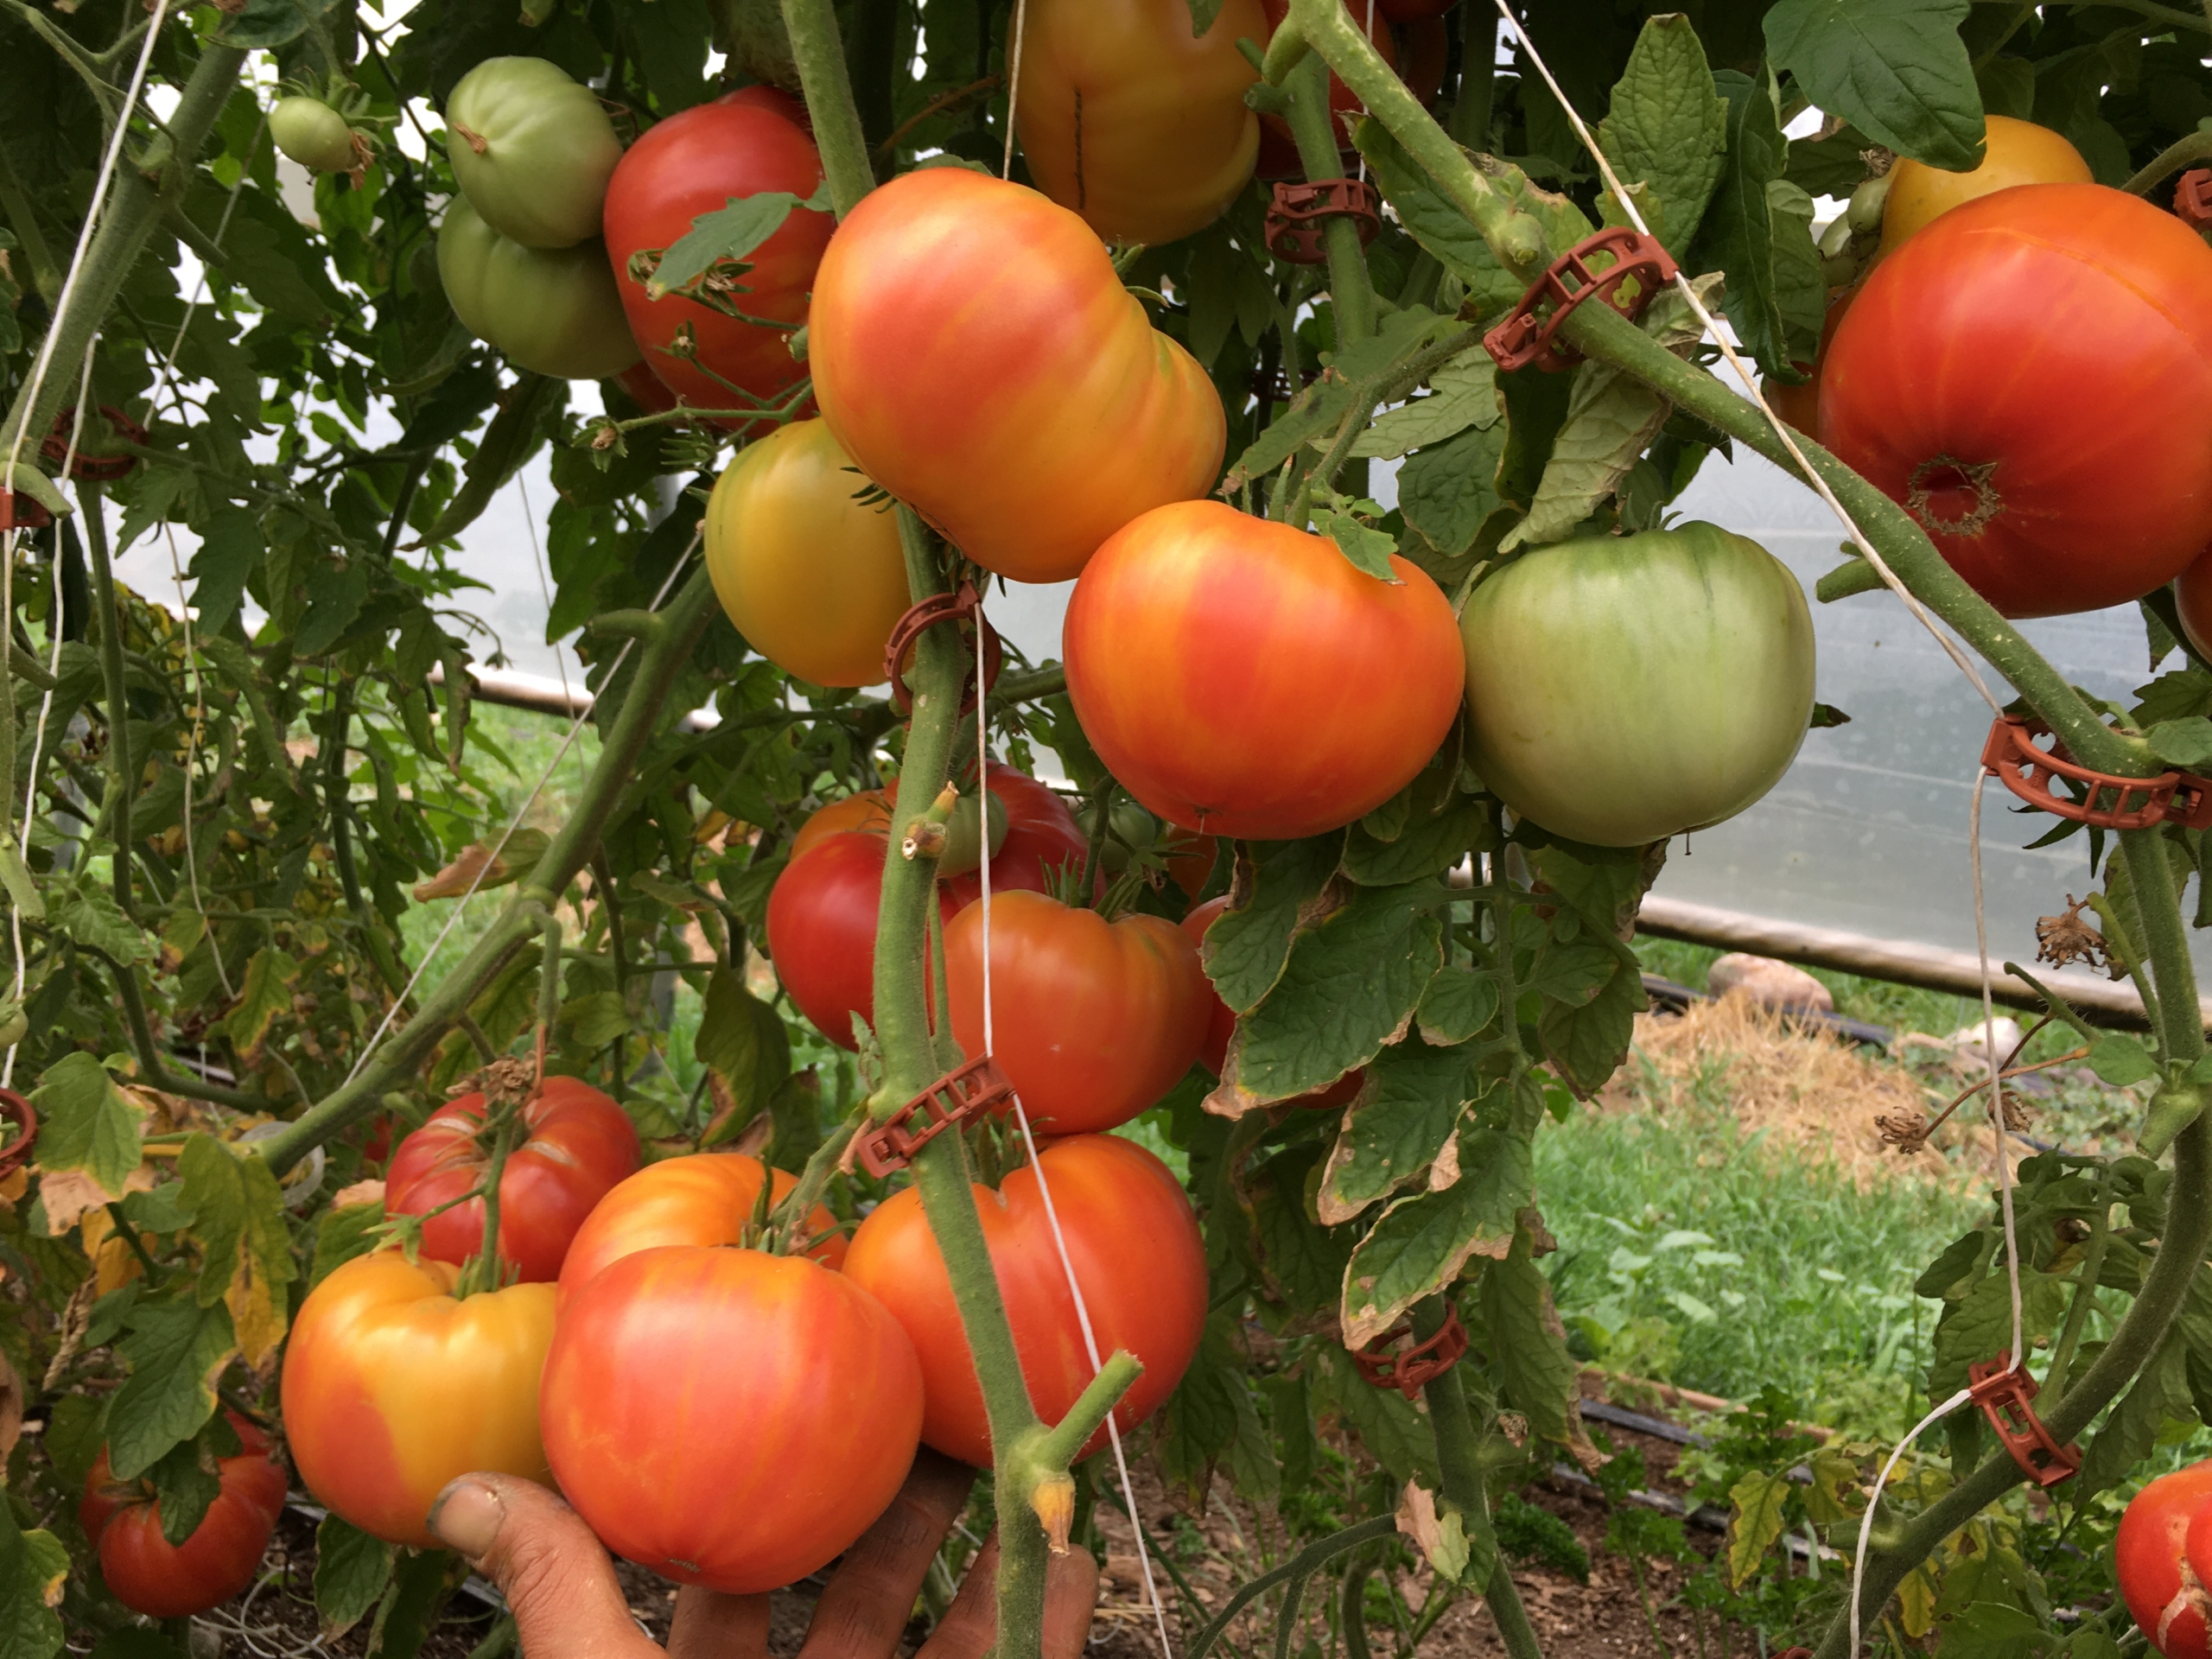 New 'Mountain Gem' F1 Hybrid Tomato: A Great Choice for Gardens with High Yields, Disease Resistance and Flavor